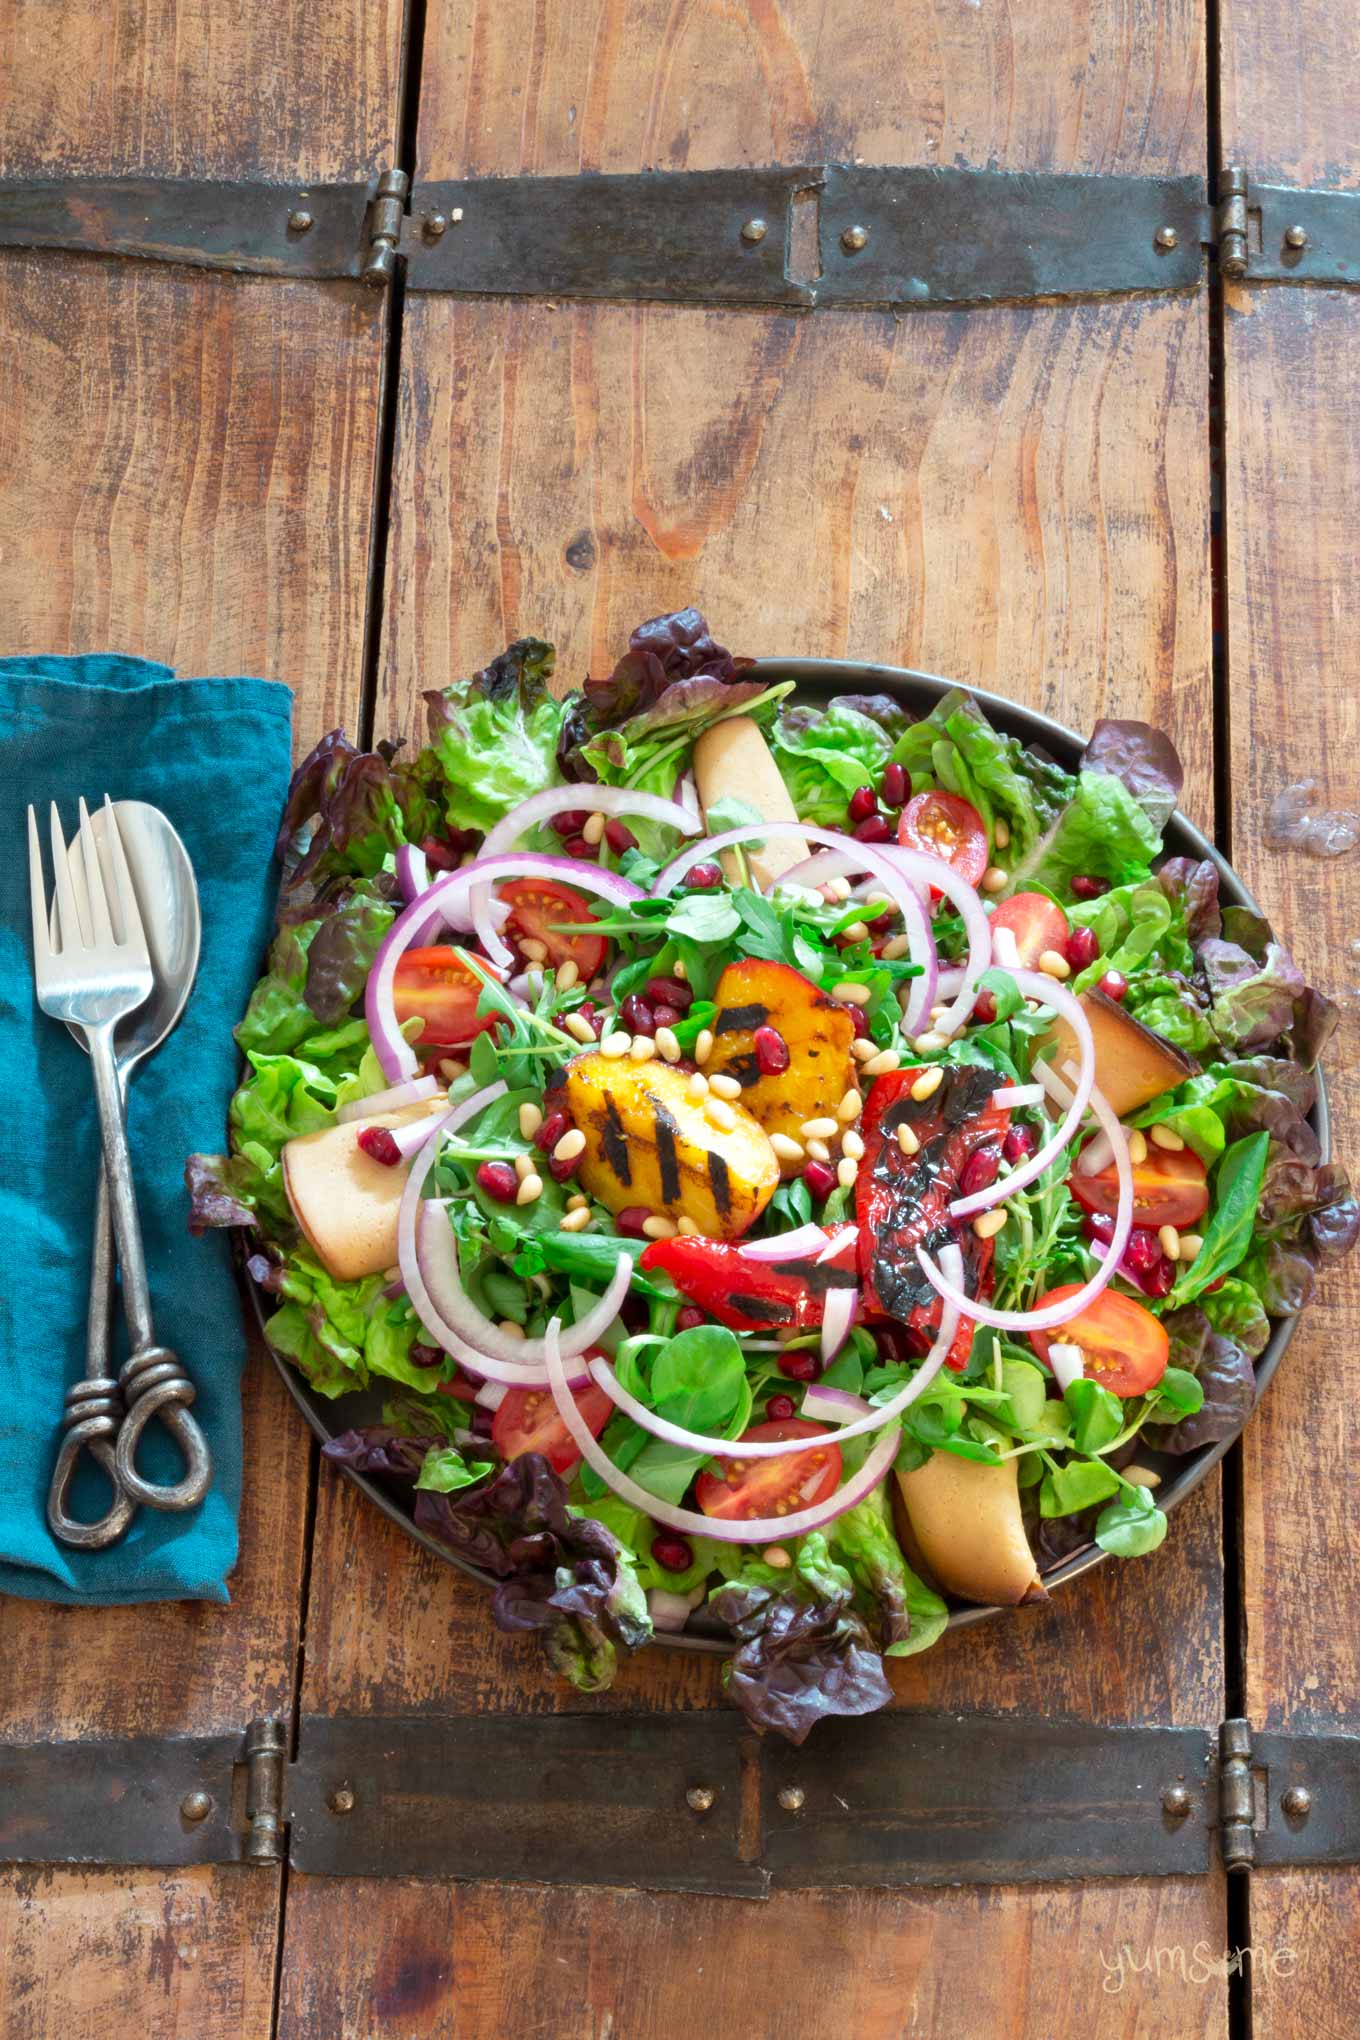 Overhead shot of a bright and colourful plate of grilled nectarine salad on a wooden table with a bright blue napkin, plus flatware.